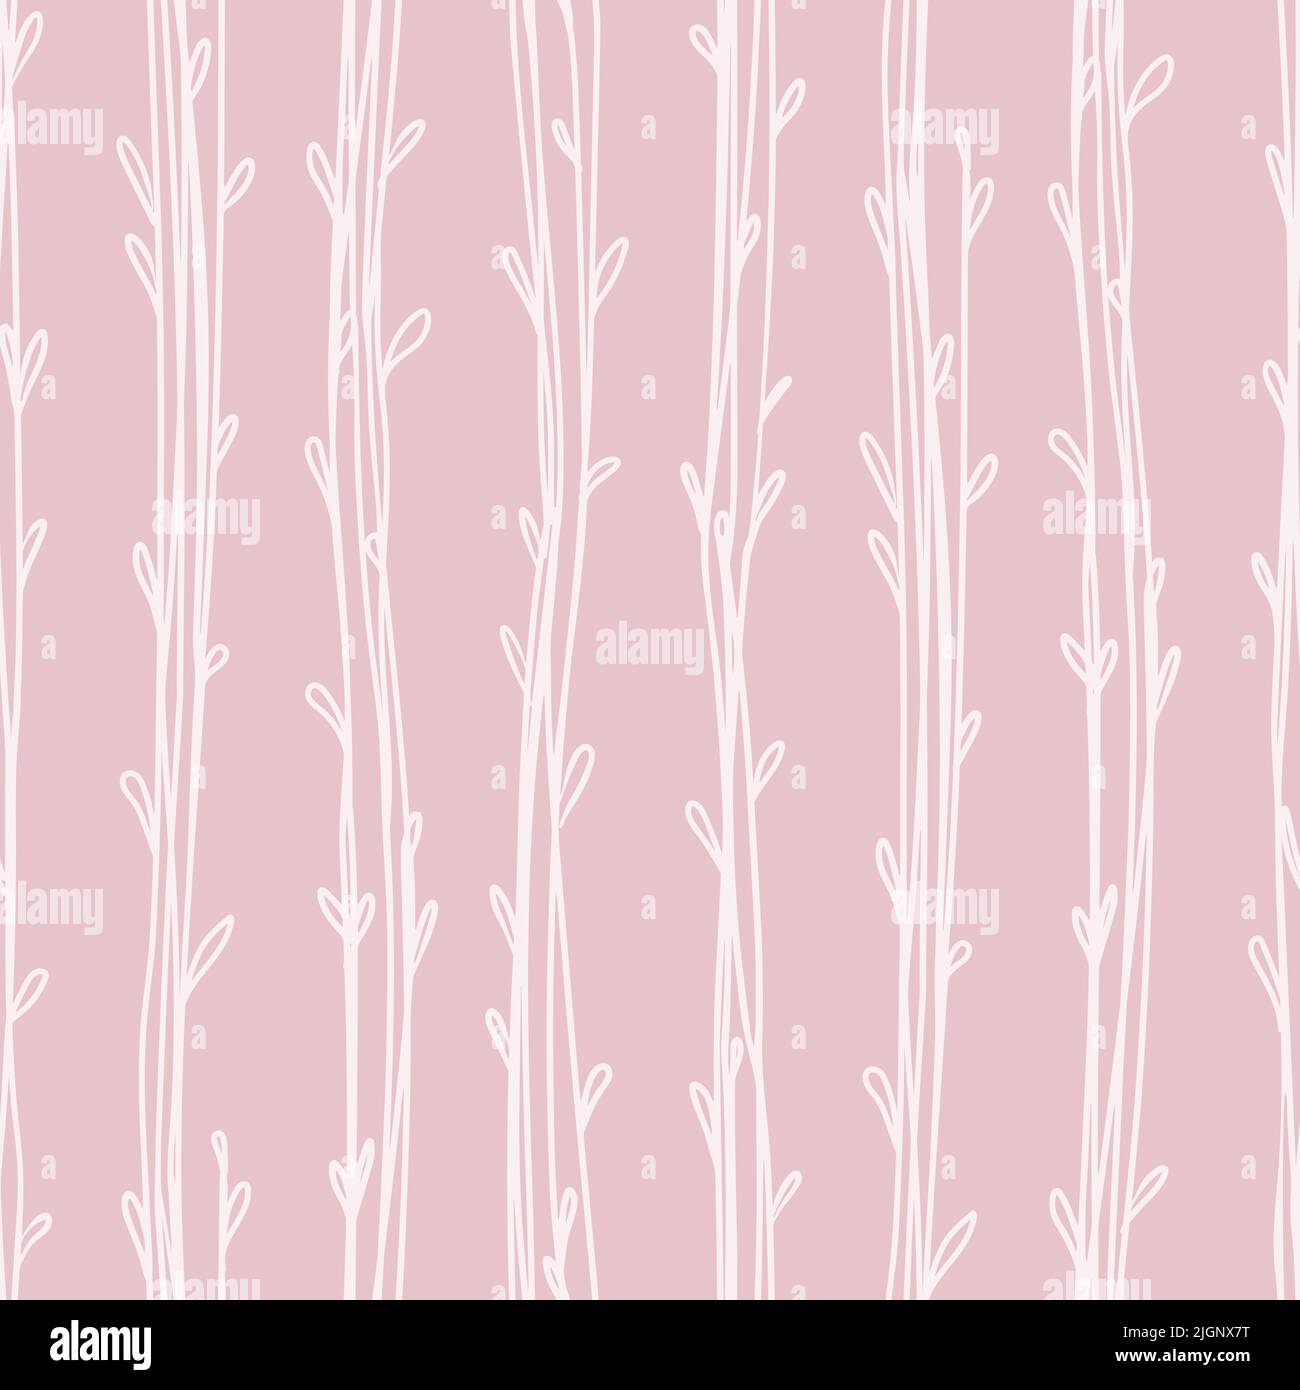 Seamless pattern - grunge brush strokes in pastel pink tones. Abstract vector illustration. Suitable for wrapping paper, various textiles, and as a ba Stock Vector